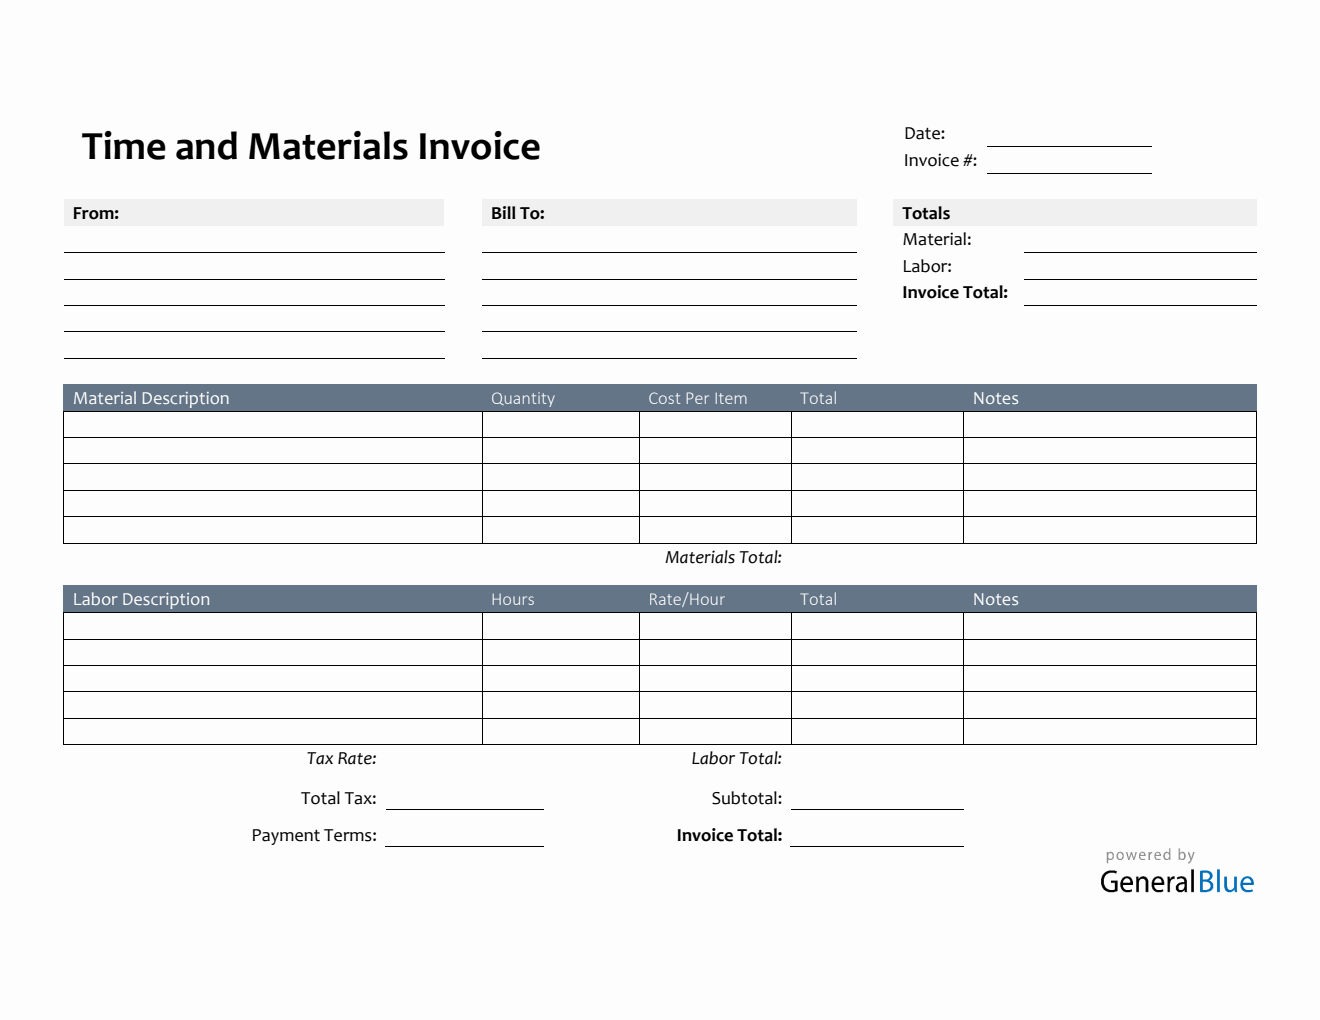 Printable Time and Materials Invoice in PDF (Colorful)